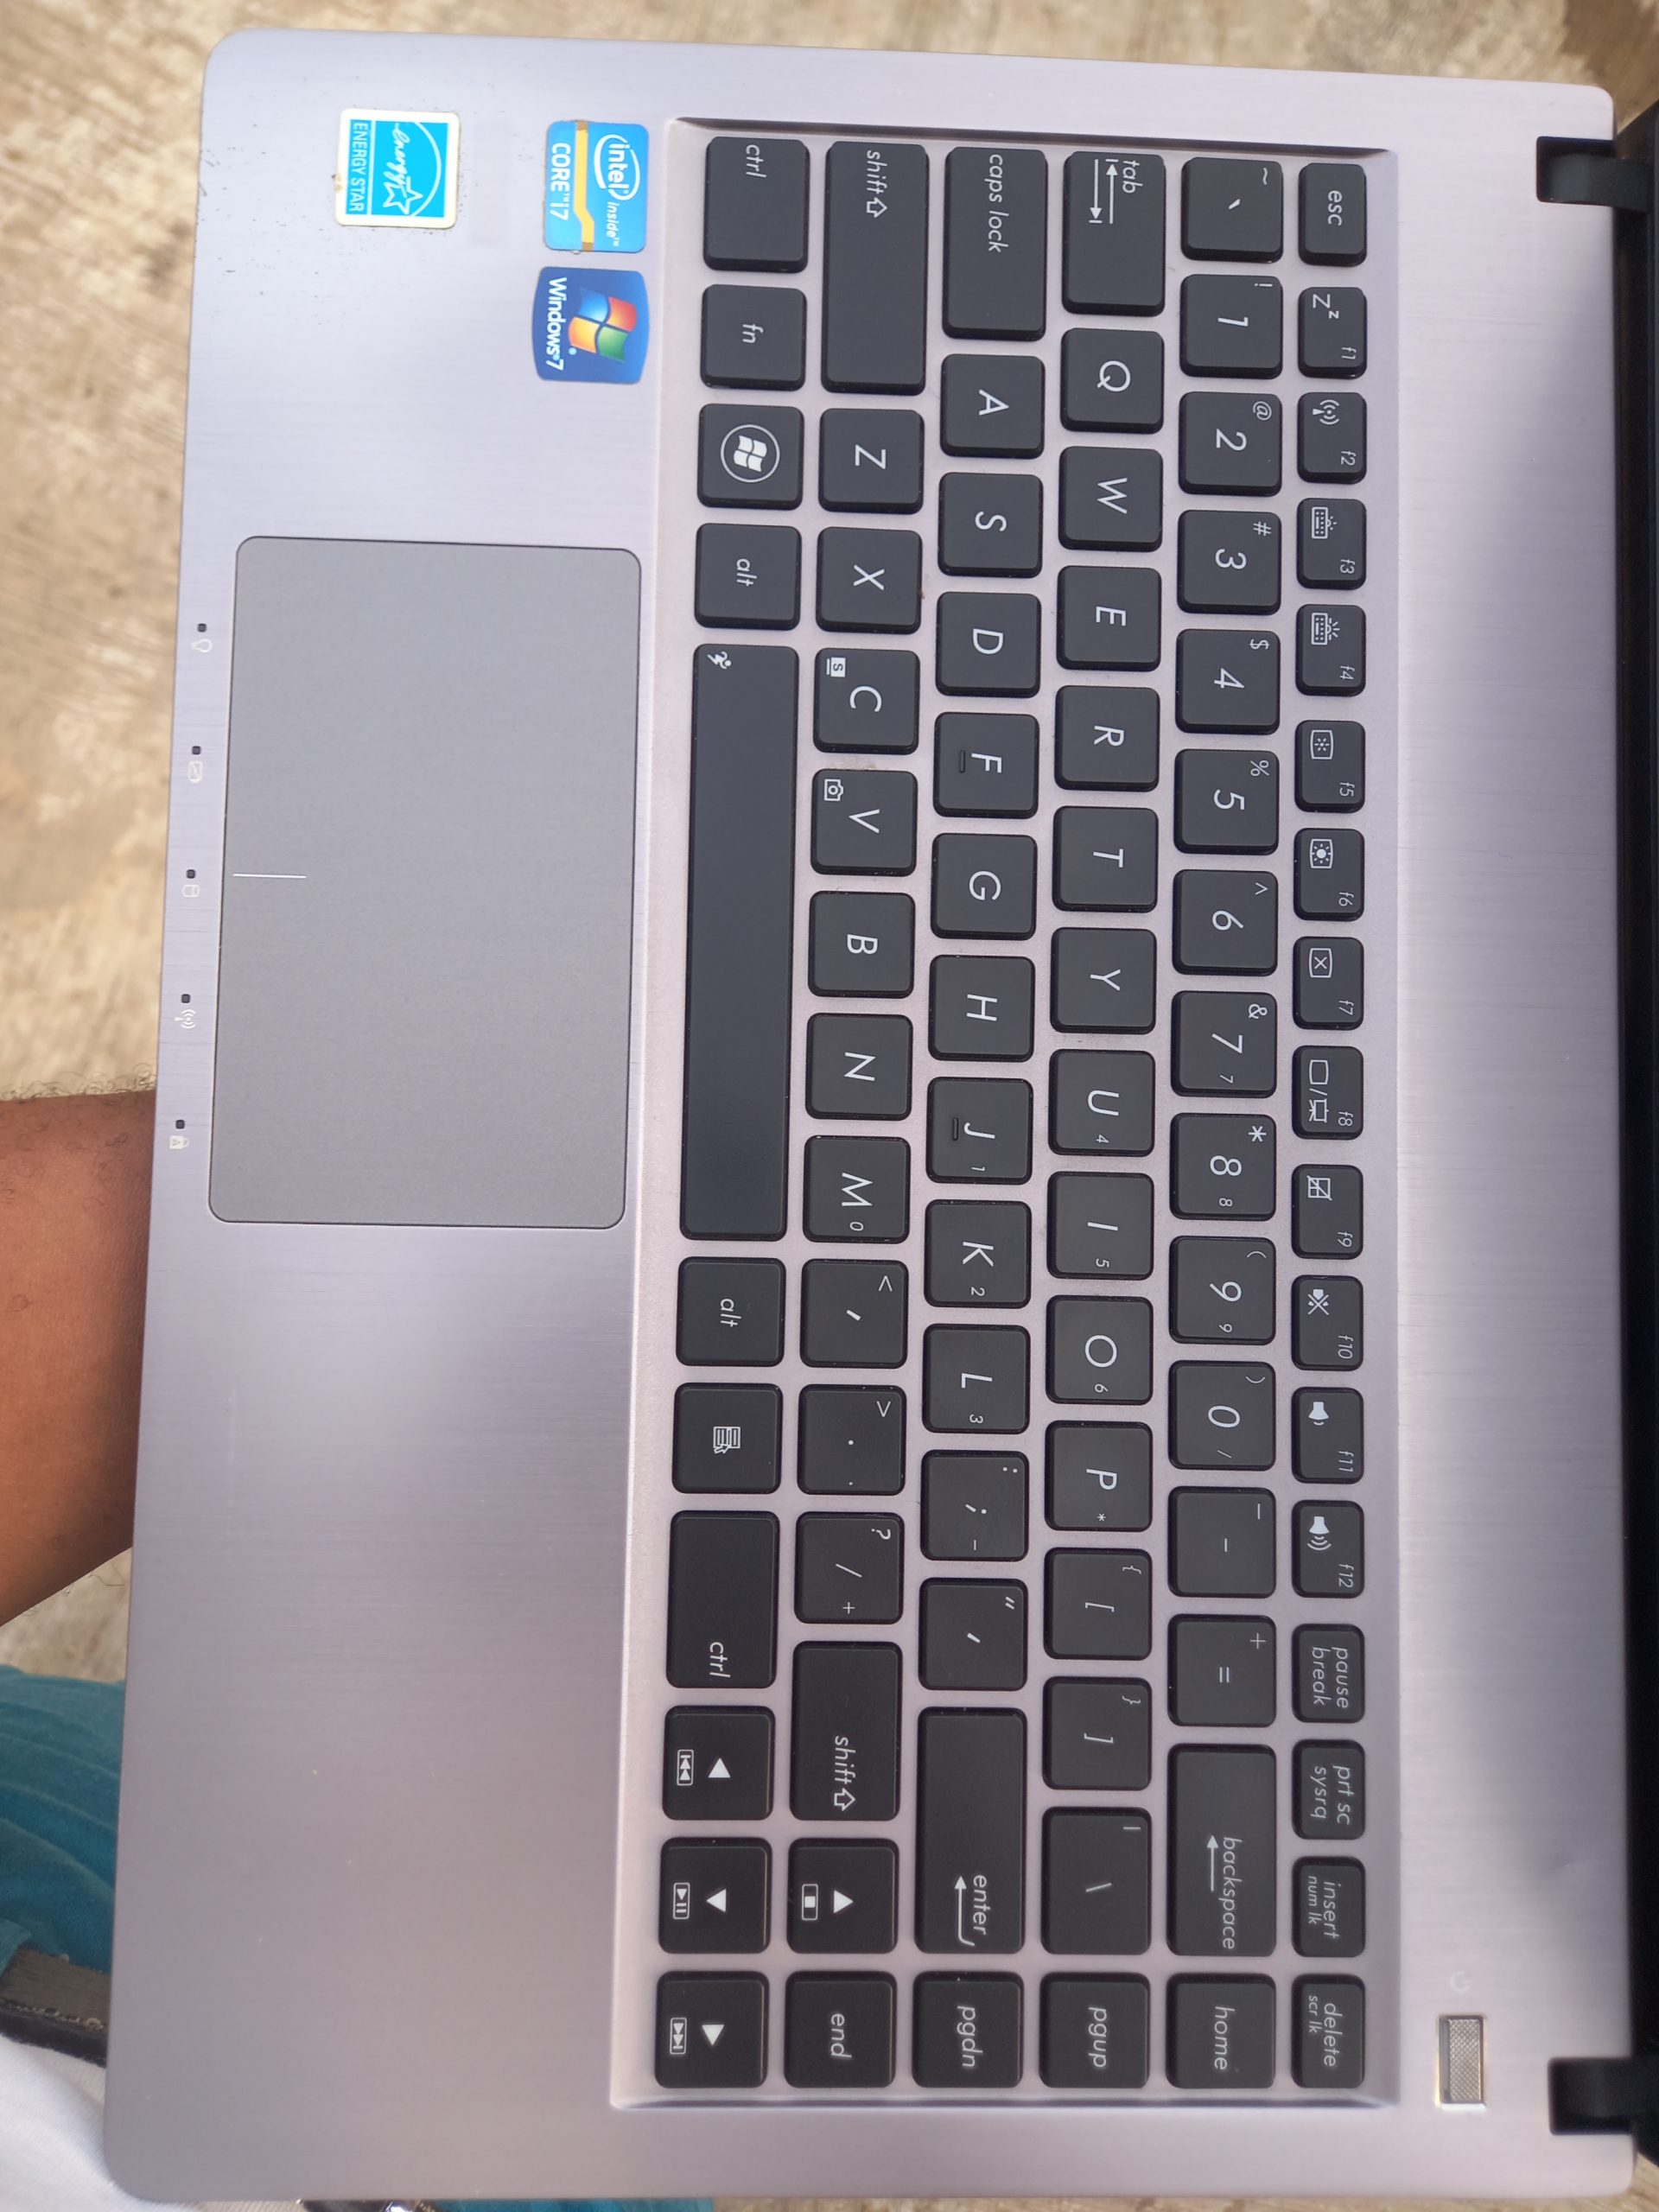 Asus U47A  core i7 320GB HDD 4G RAM keyboard light camera HDMI Bluetooth, Windows 10pro, very portable and lightweight with good battery backup 3hrs up for sale at affordable price